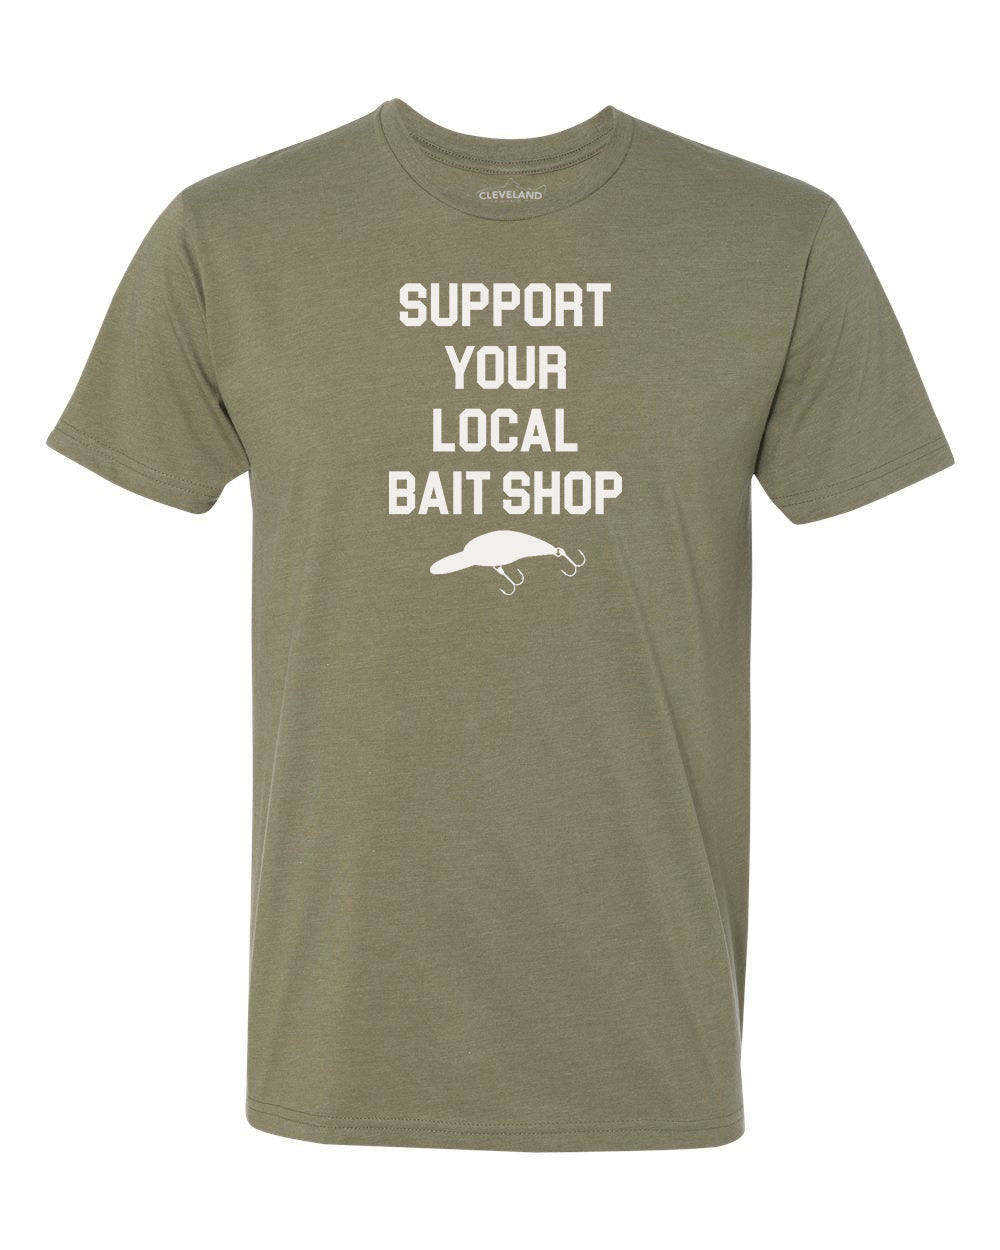 Support Your Local Bait Shop Tee Large